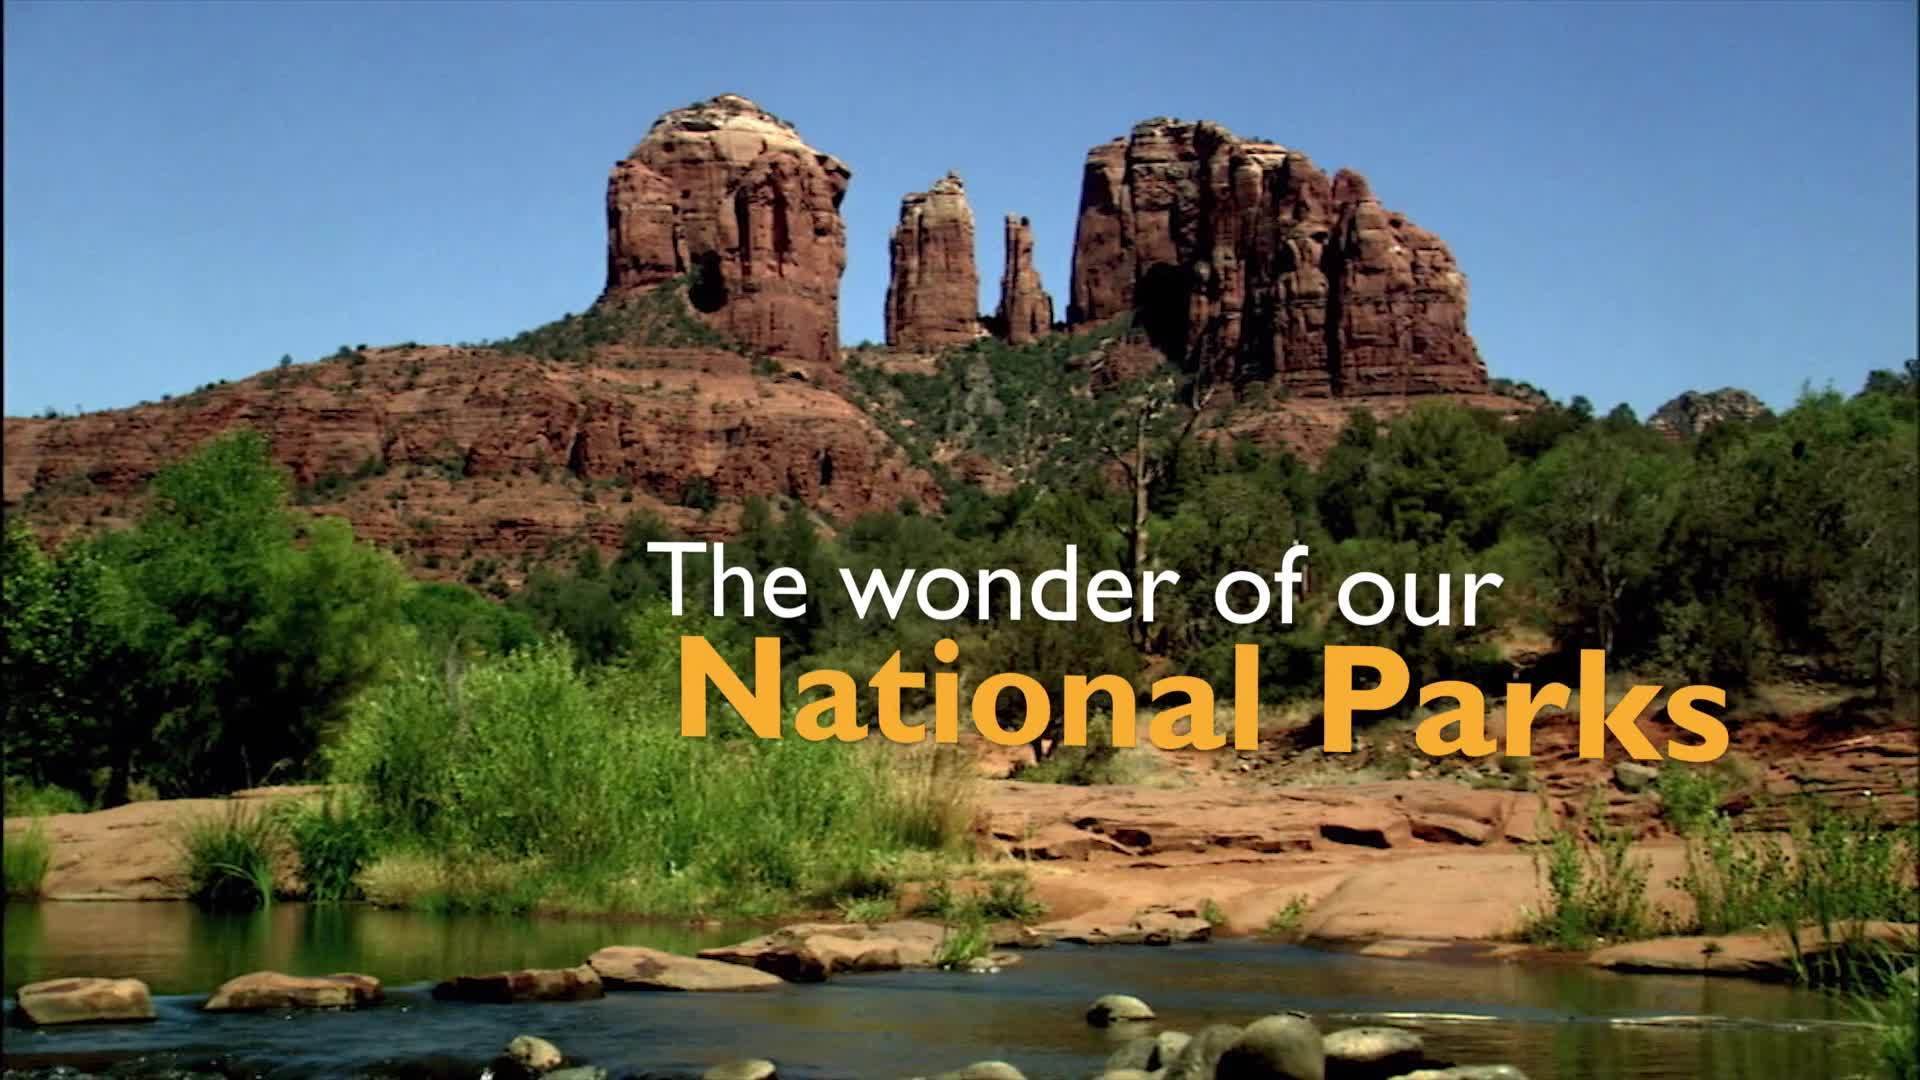 The Wonder of our National Parks